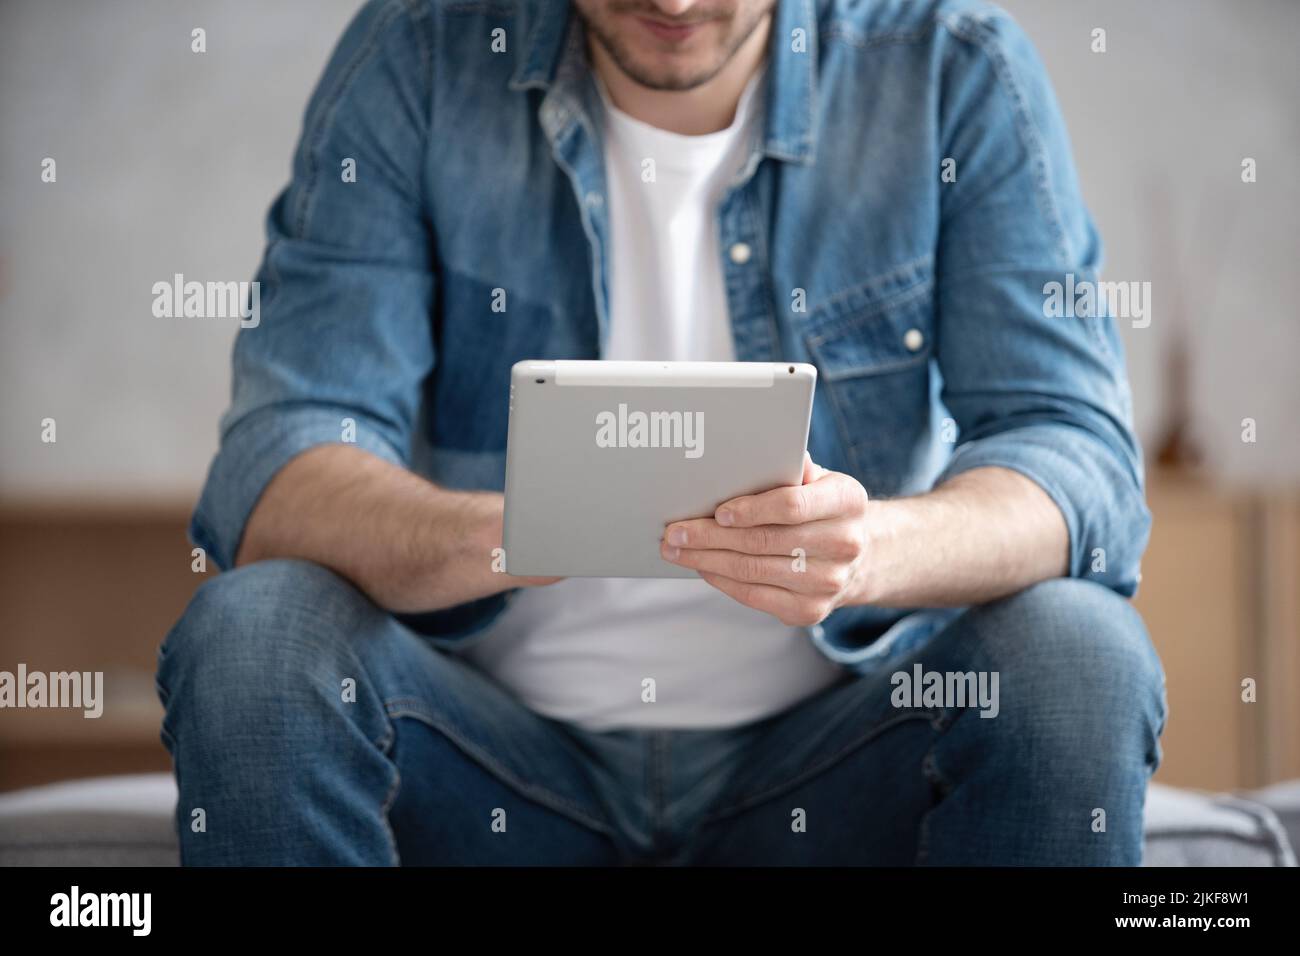 Man Spending Time With Digital Tablet At Home, Reading News, Browsing Internet, Watching Videos, Checking Social Networks While Relaxing On Couch In L Stock Photo